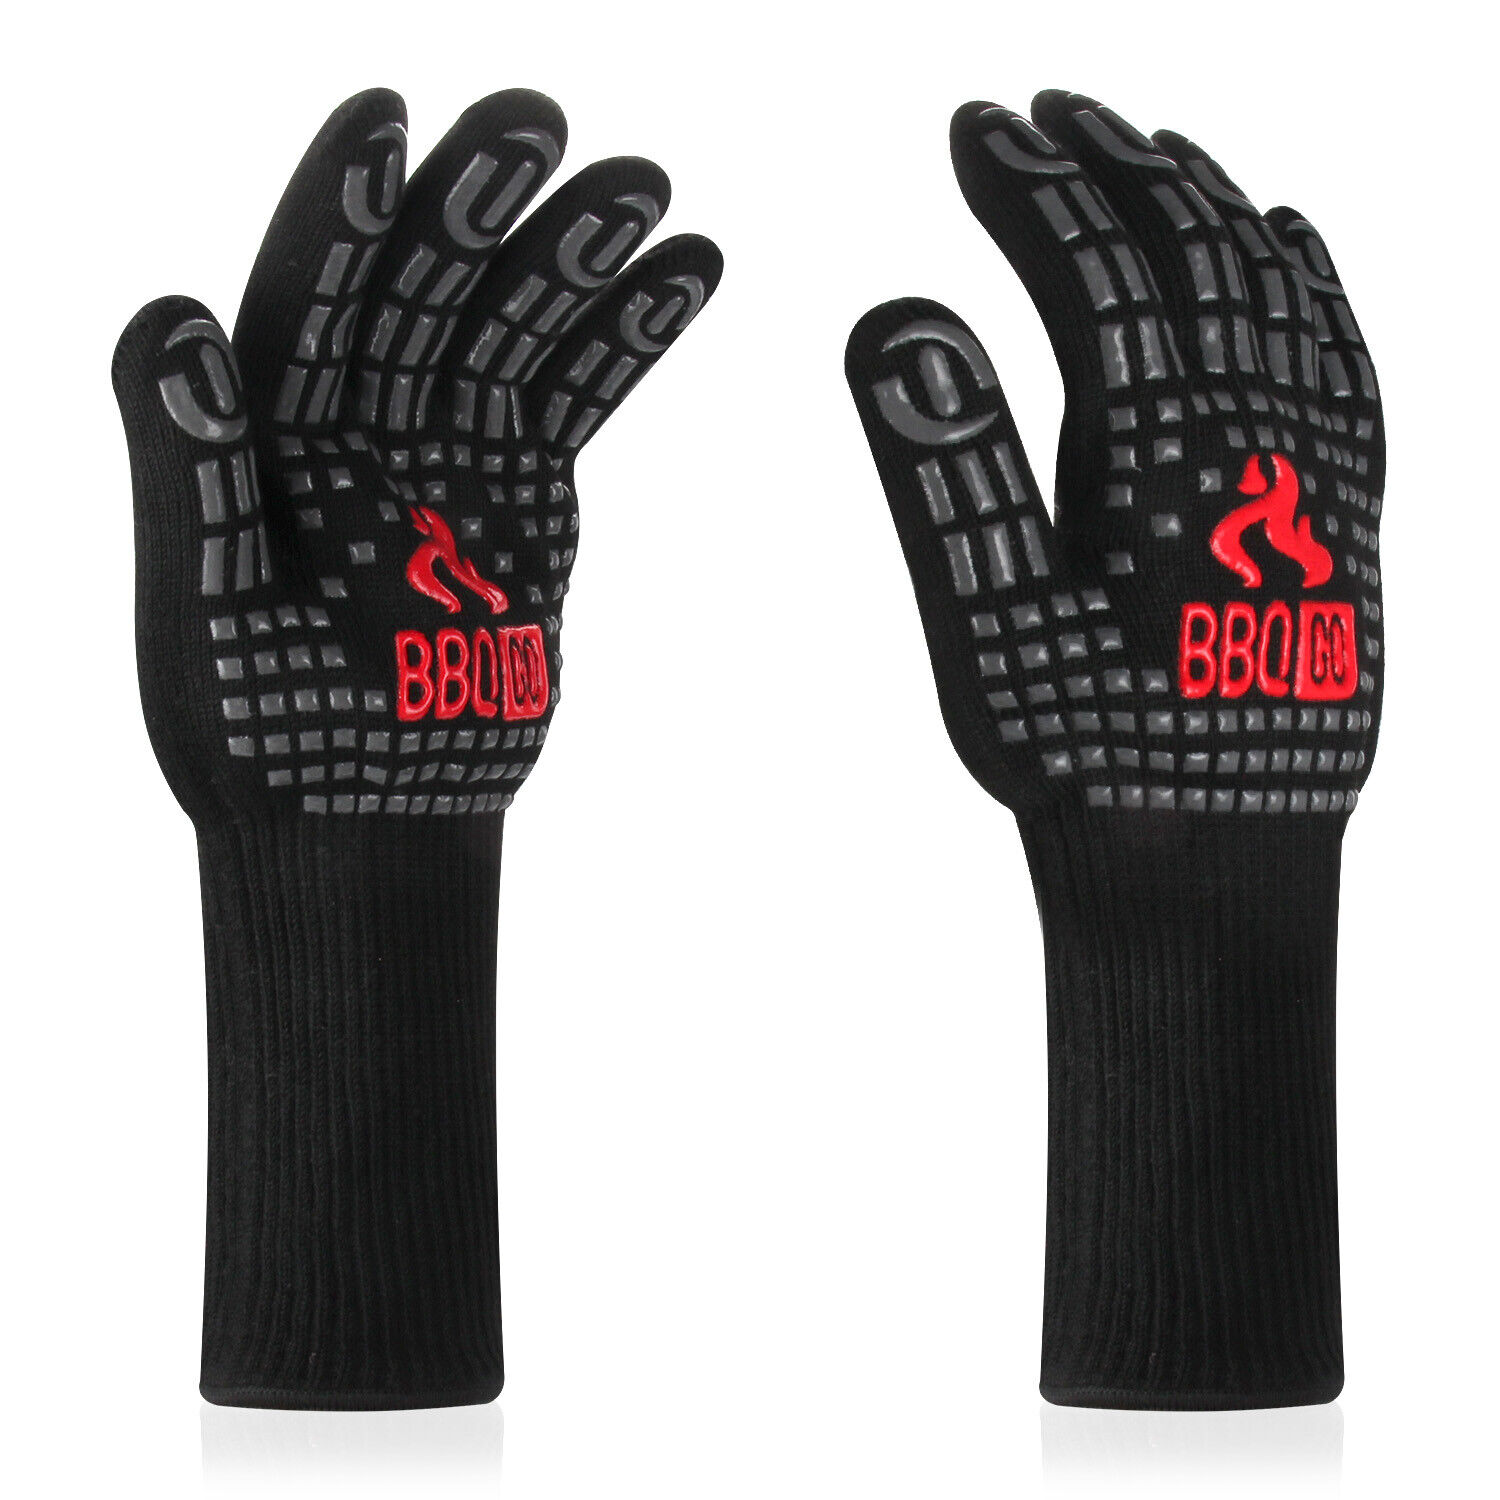 BBQ Barbecue Gloves Grill Oven Mittens Cooking 800 ℃ Extreme Heat Resistant 5.5'